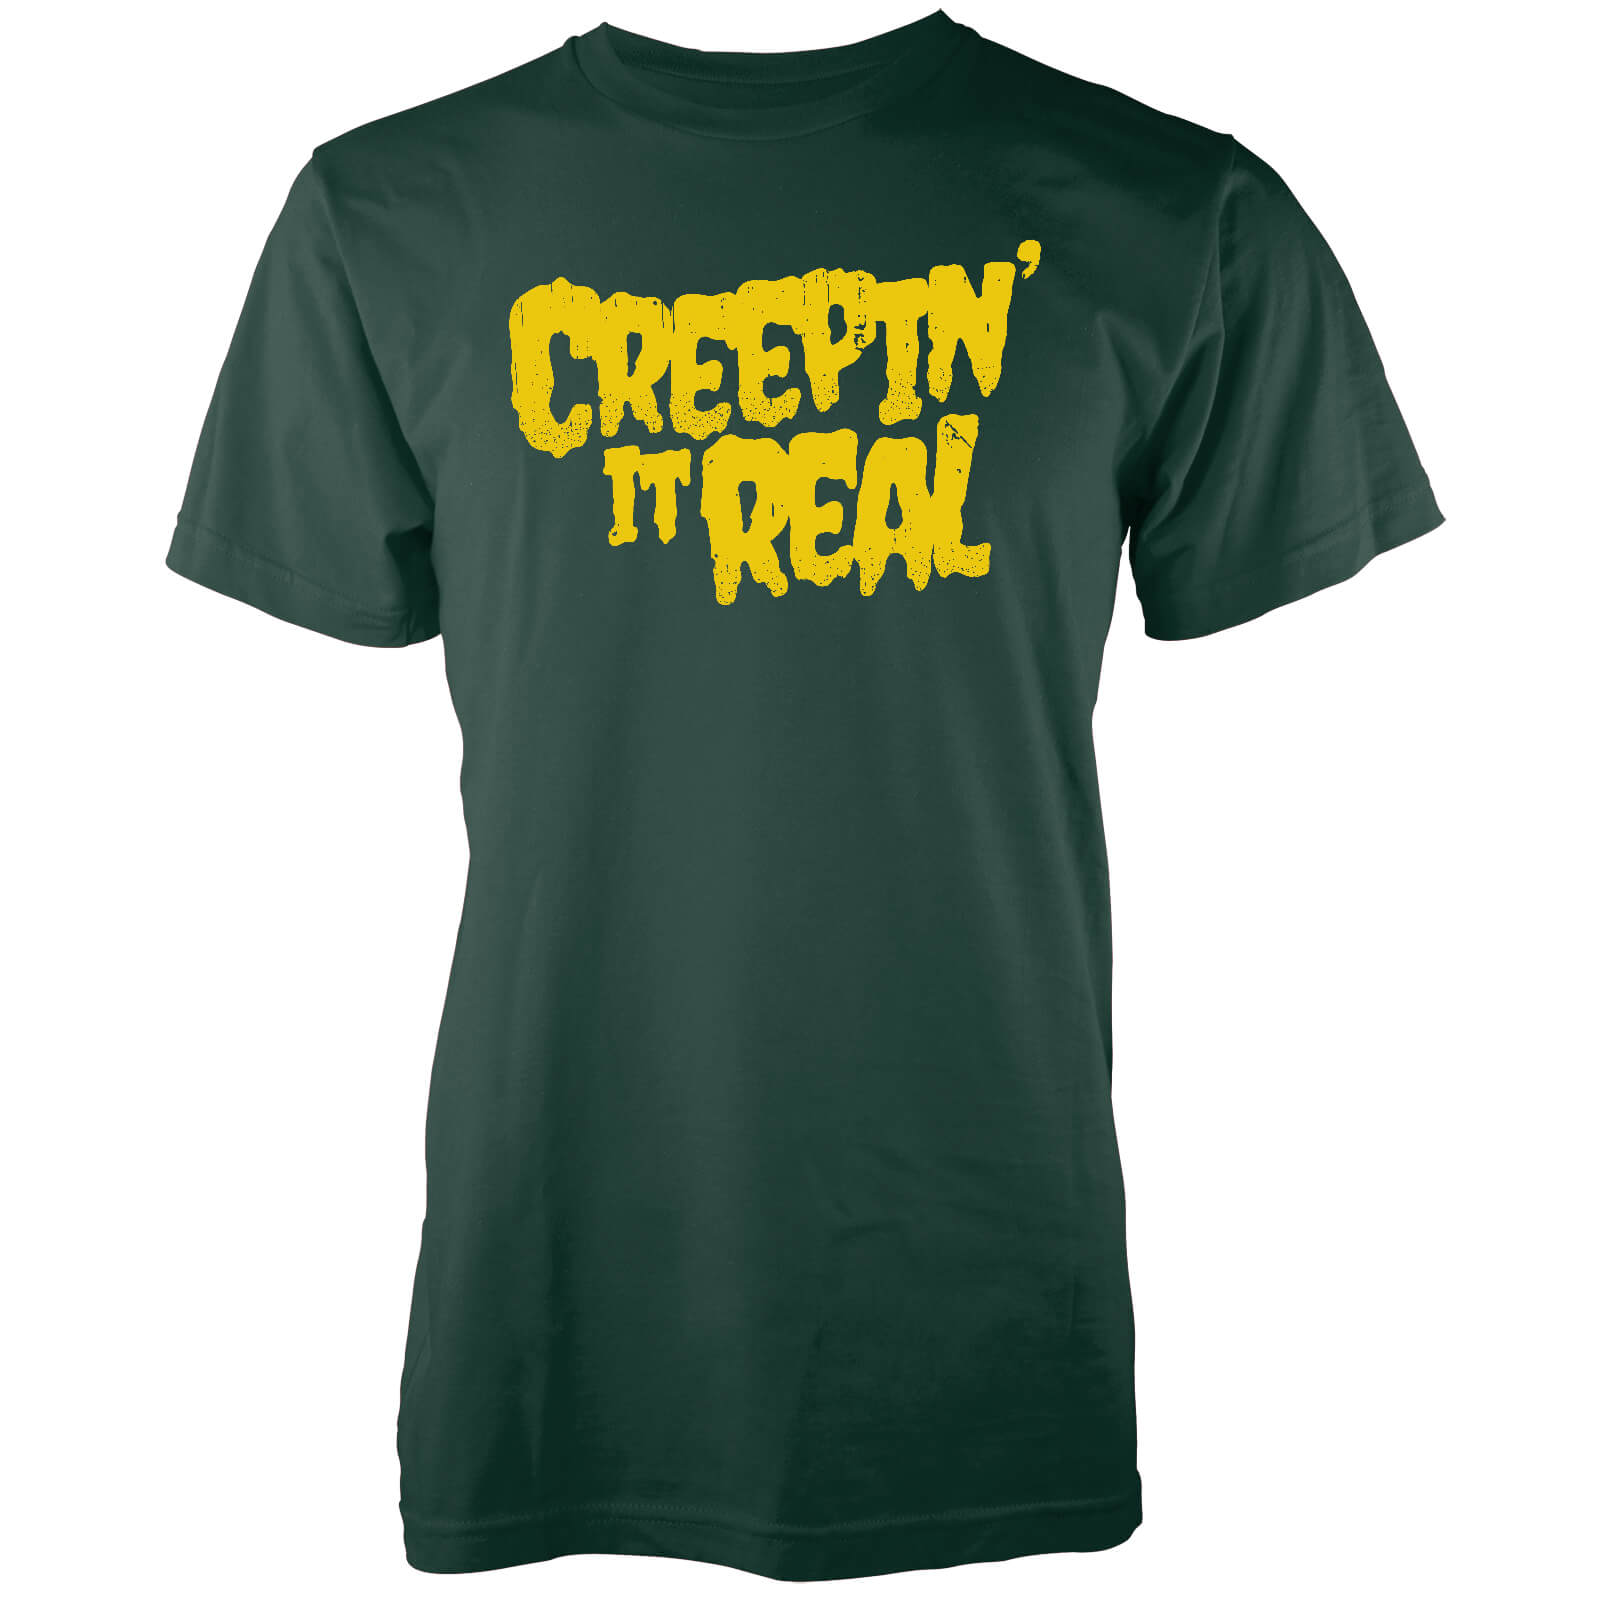 Creepin It Real Men's Forest Green T-Shirt - S - Forest Green